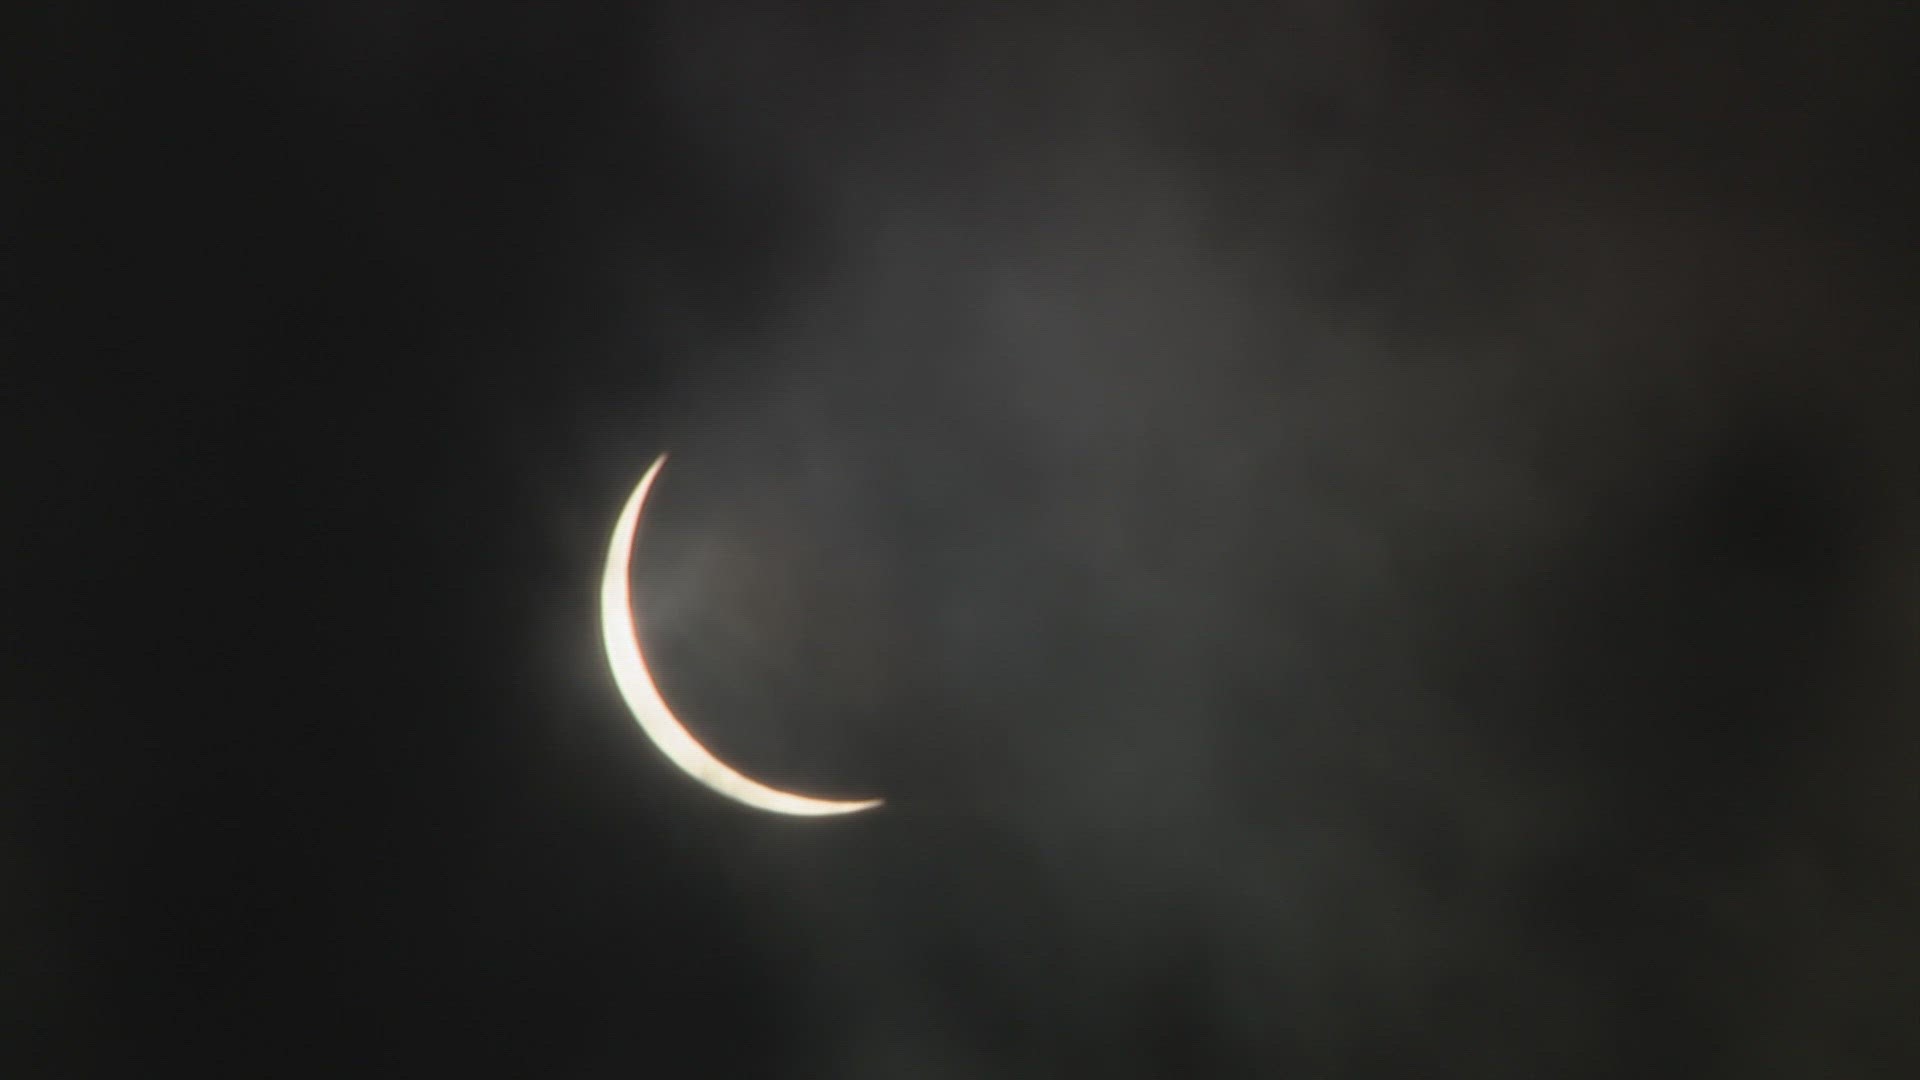 KHOU 11 crews spread out across the state to get the best look at the total solar eclipse.